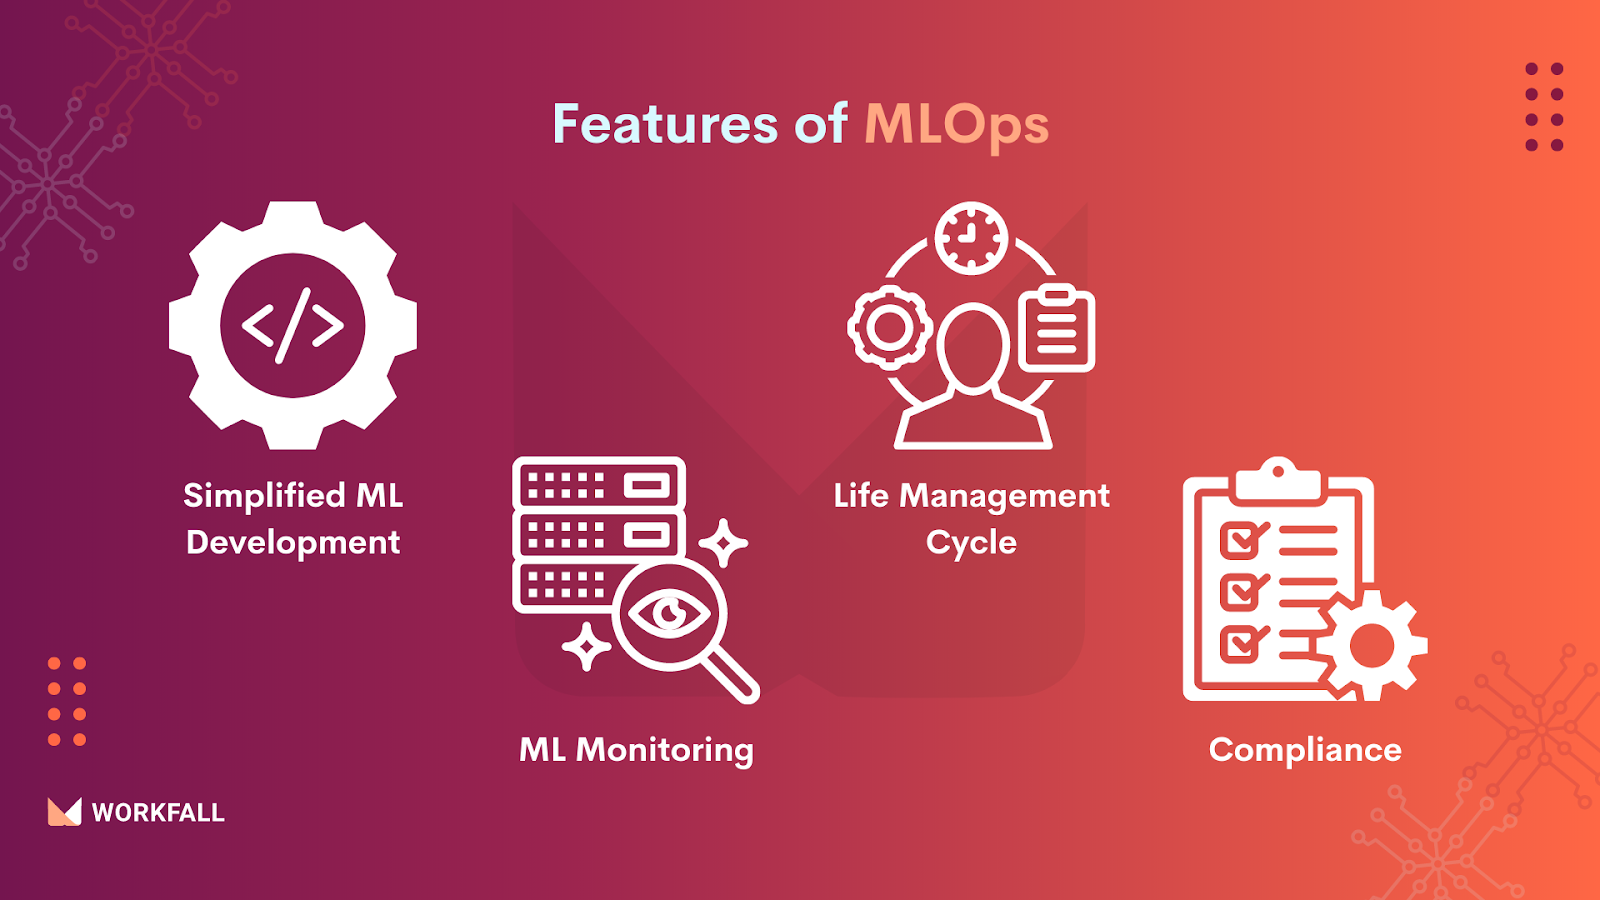 Roadmap To Become A Successful MLOps Engineer